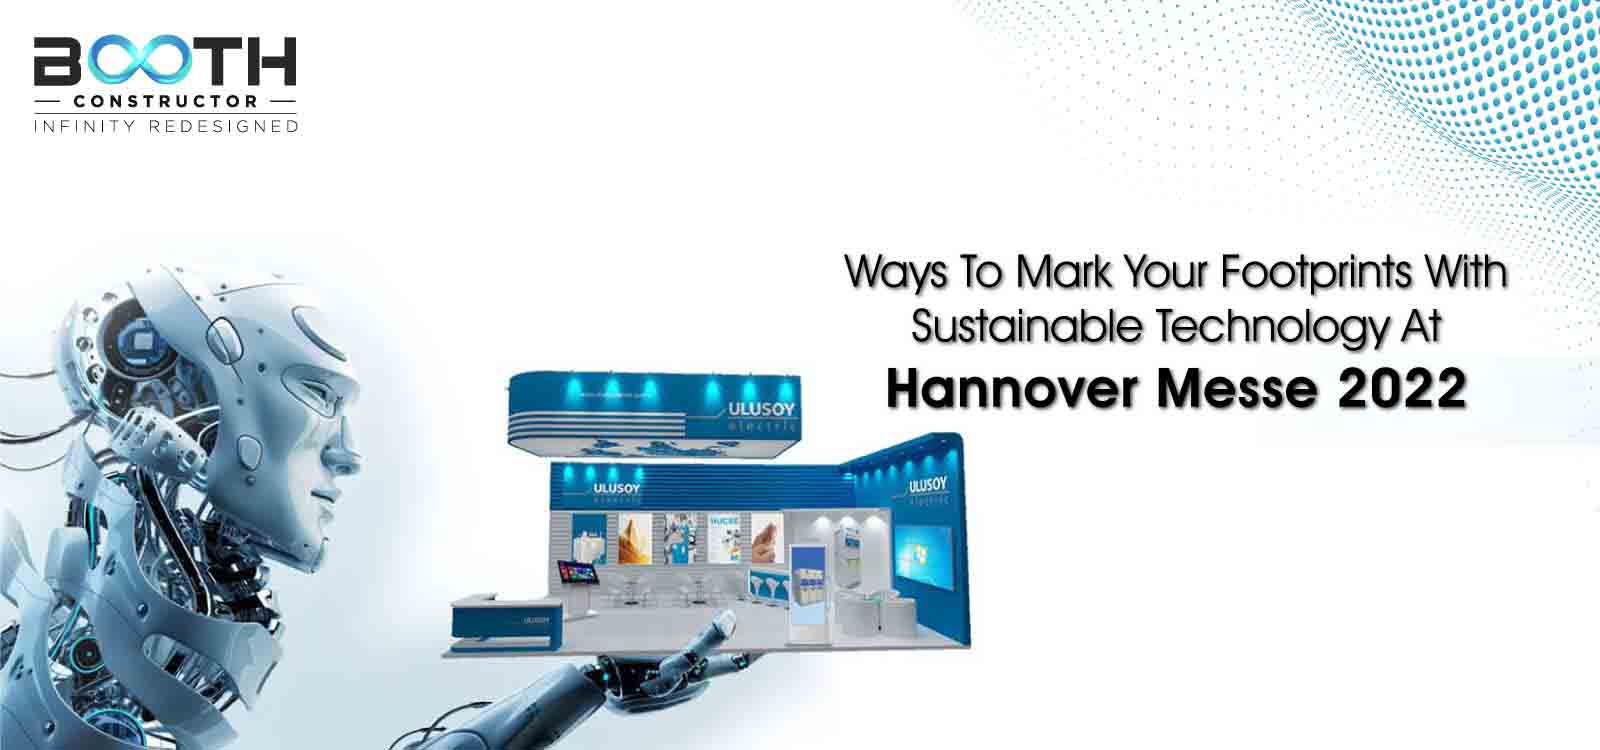 Ways To Mark Your Footprints With Sustainable Technology At Hannover Messe 2022